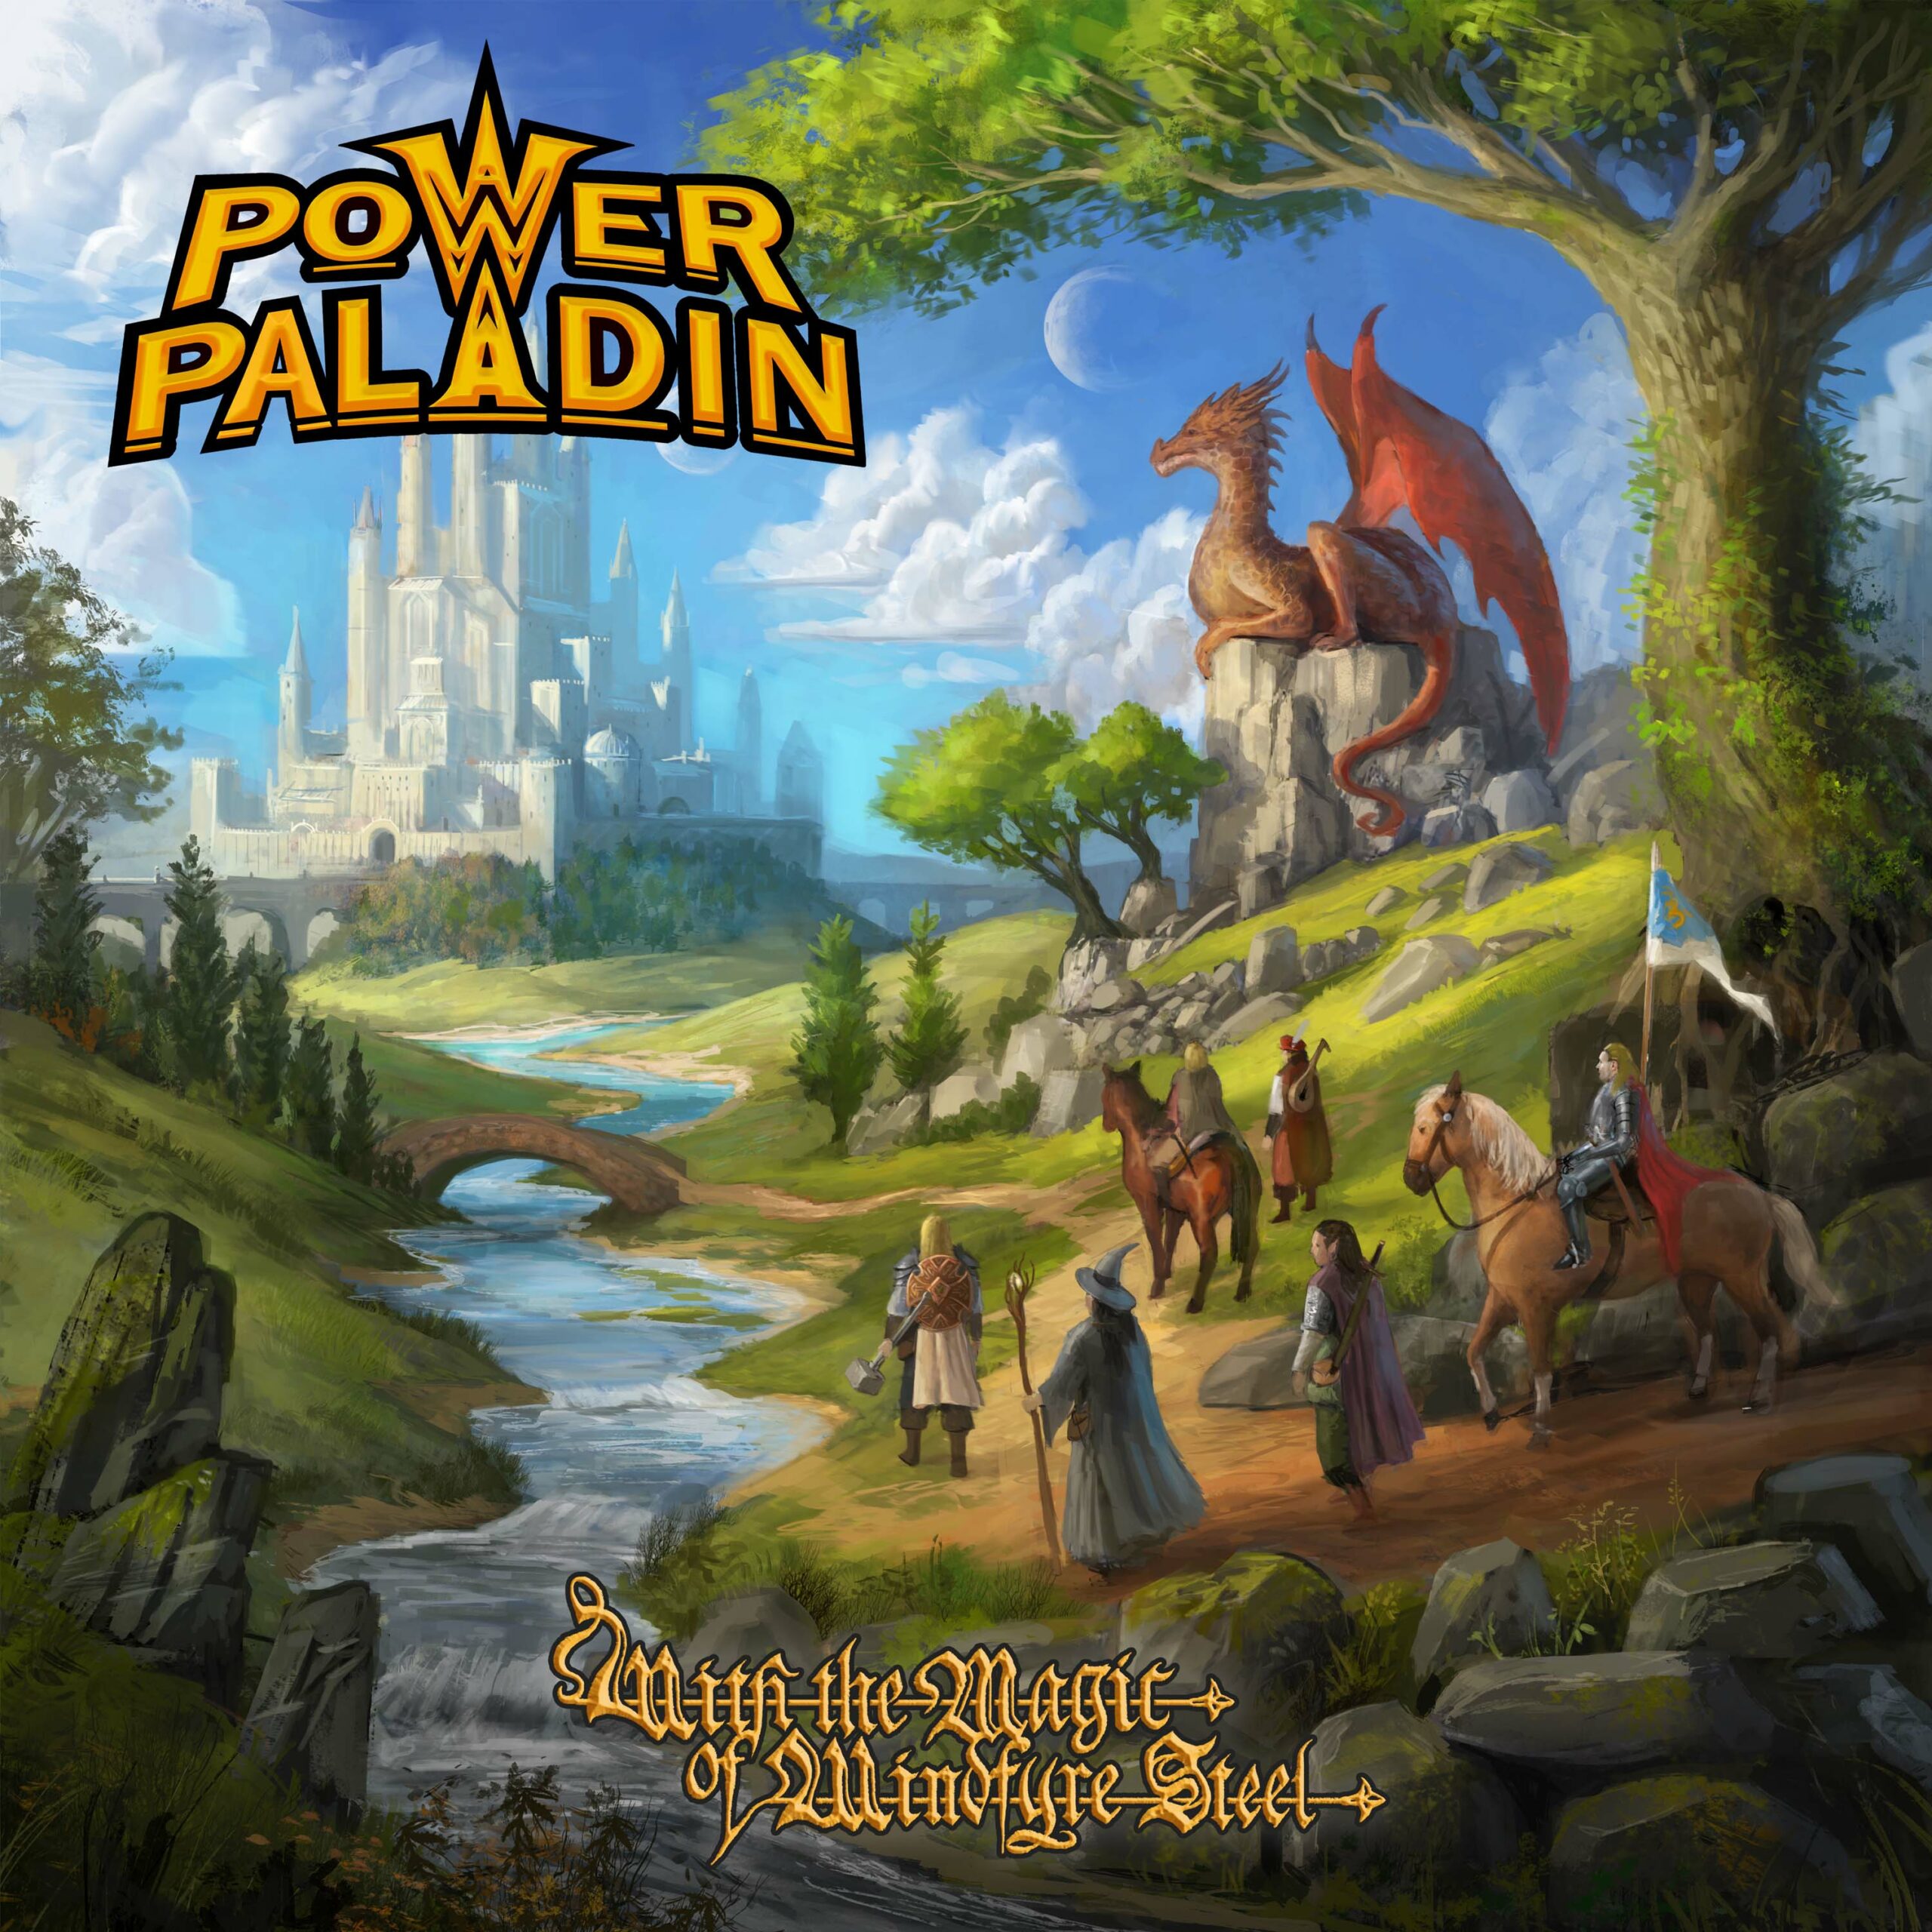 Power Paladin (IS) – With The Magic Of Windfyre Steel